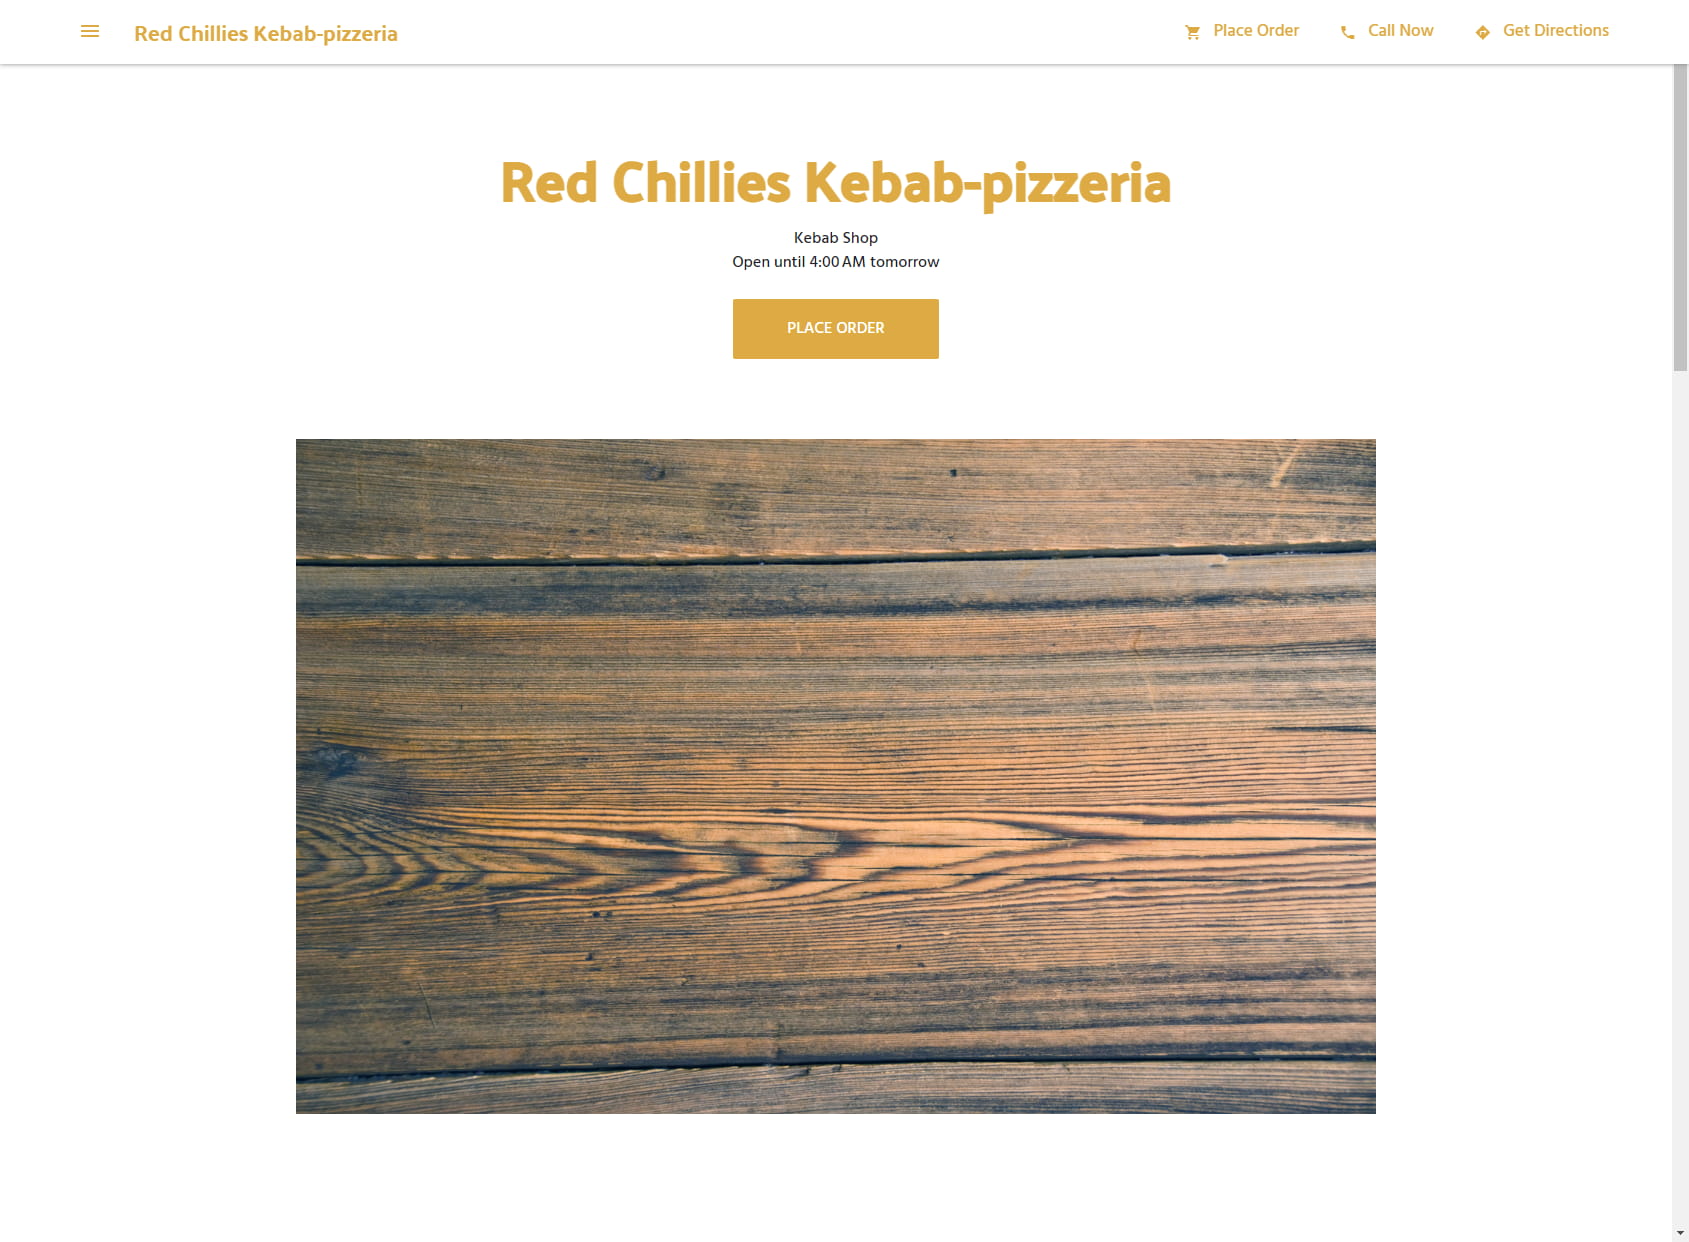 Red Chillies Kebab-pizzeria